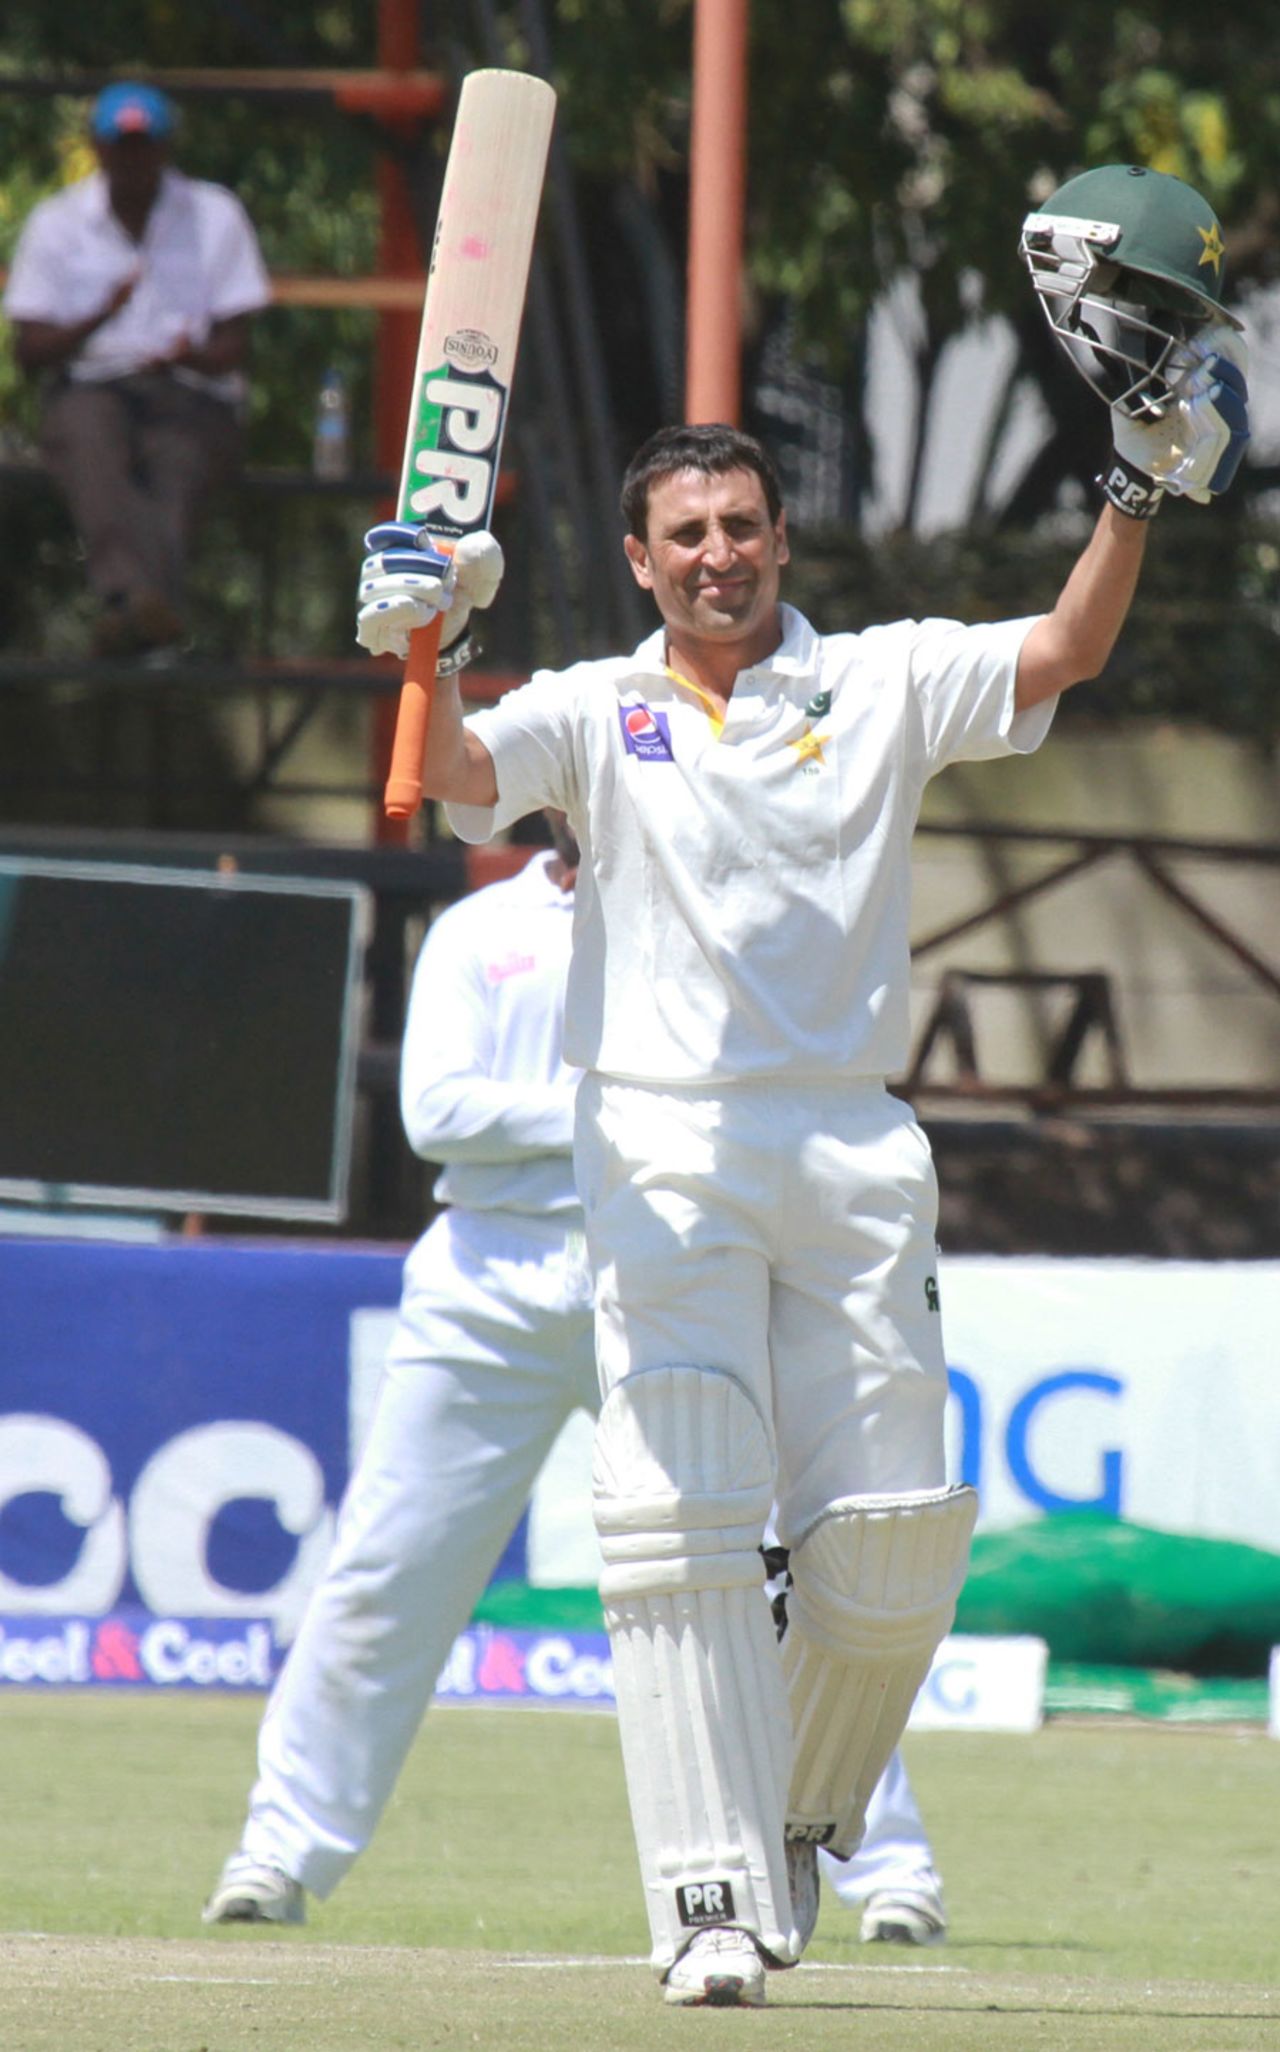 Younis Khan raises his bat after his first Test century against Zimbabwe, Zimbabwe v Pakistan, 1st Test, 4th day, Harare, September 6, 2013